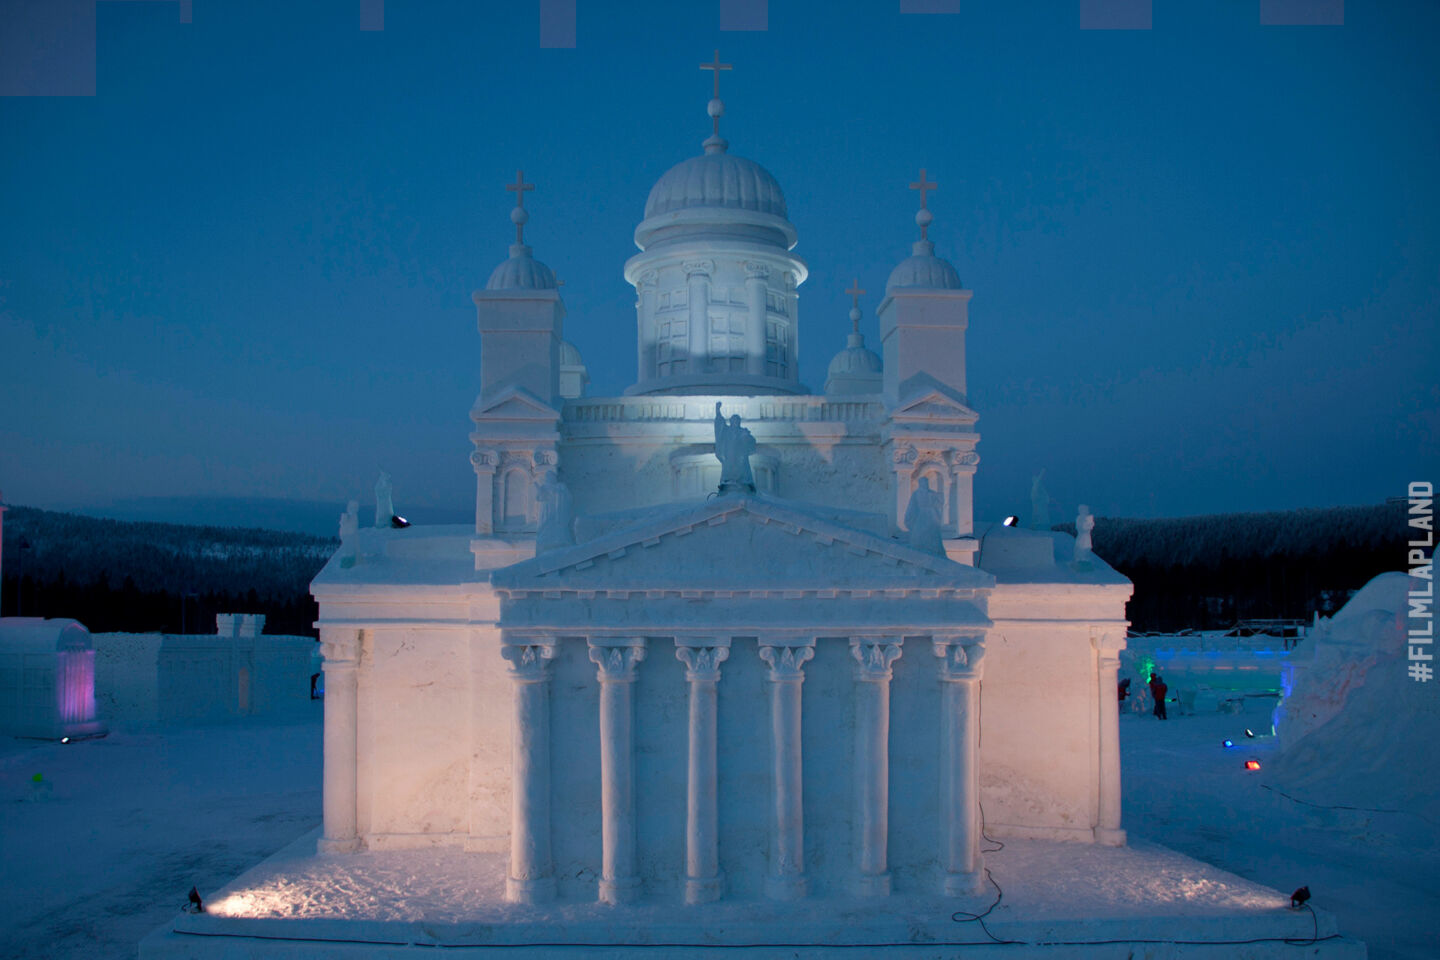 Snow castles, igloos, ice tracks and more, a feature of Finnish Lapland filming locations